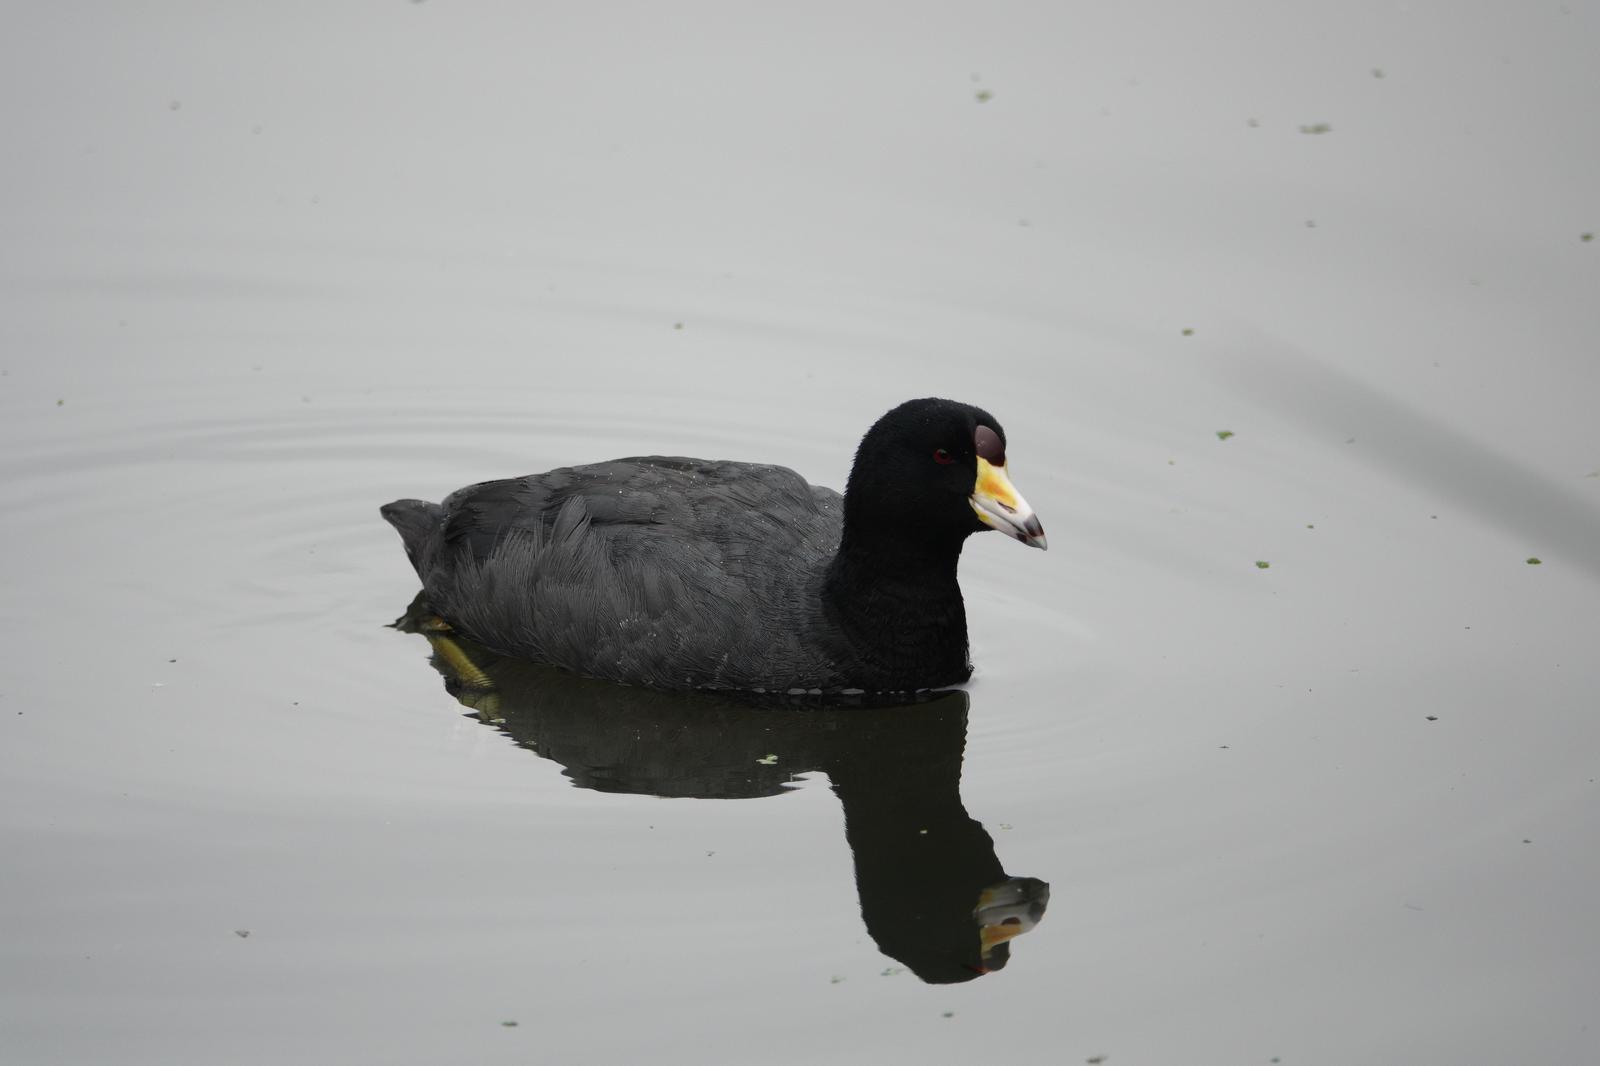 American Coot Photo by Bonnie Clarfield-Bylin